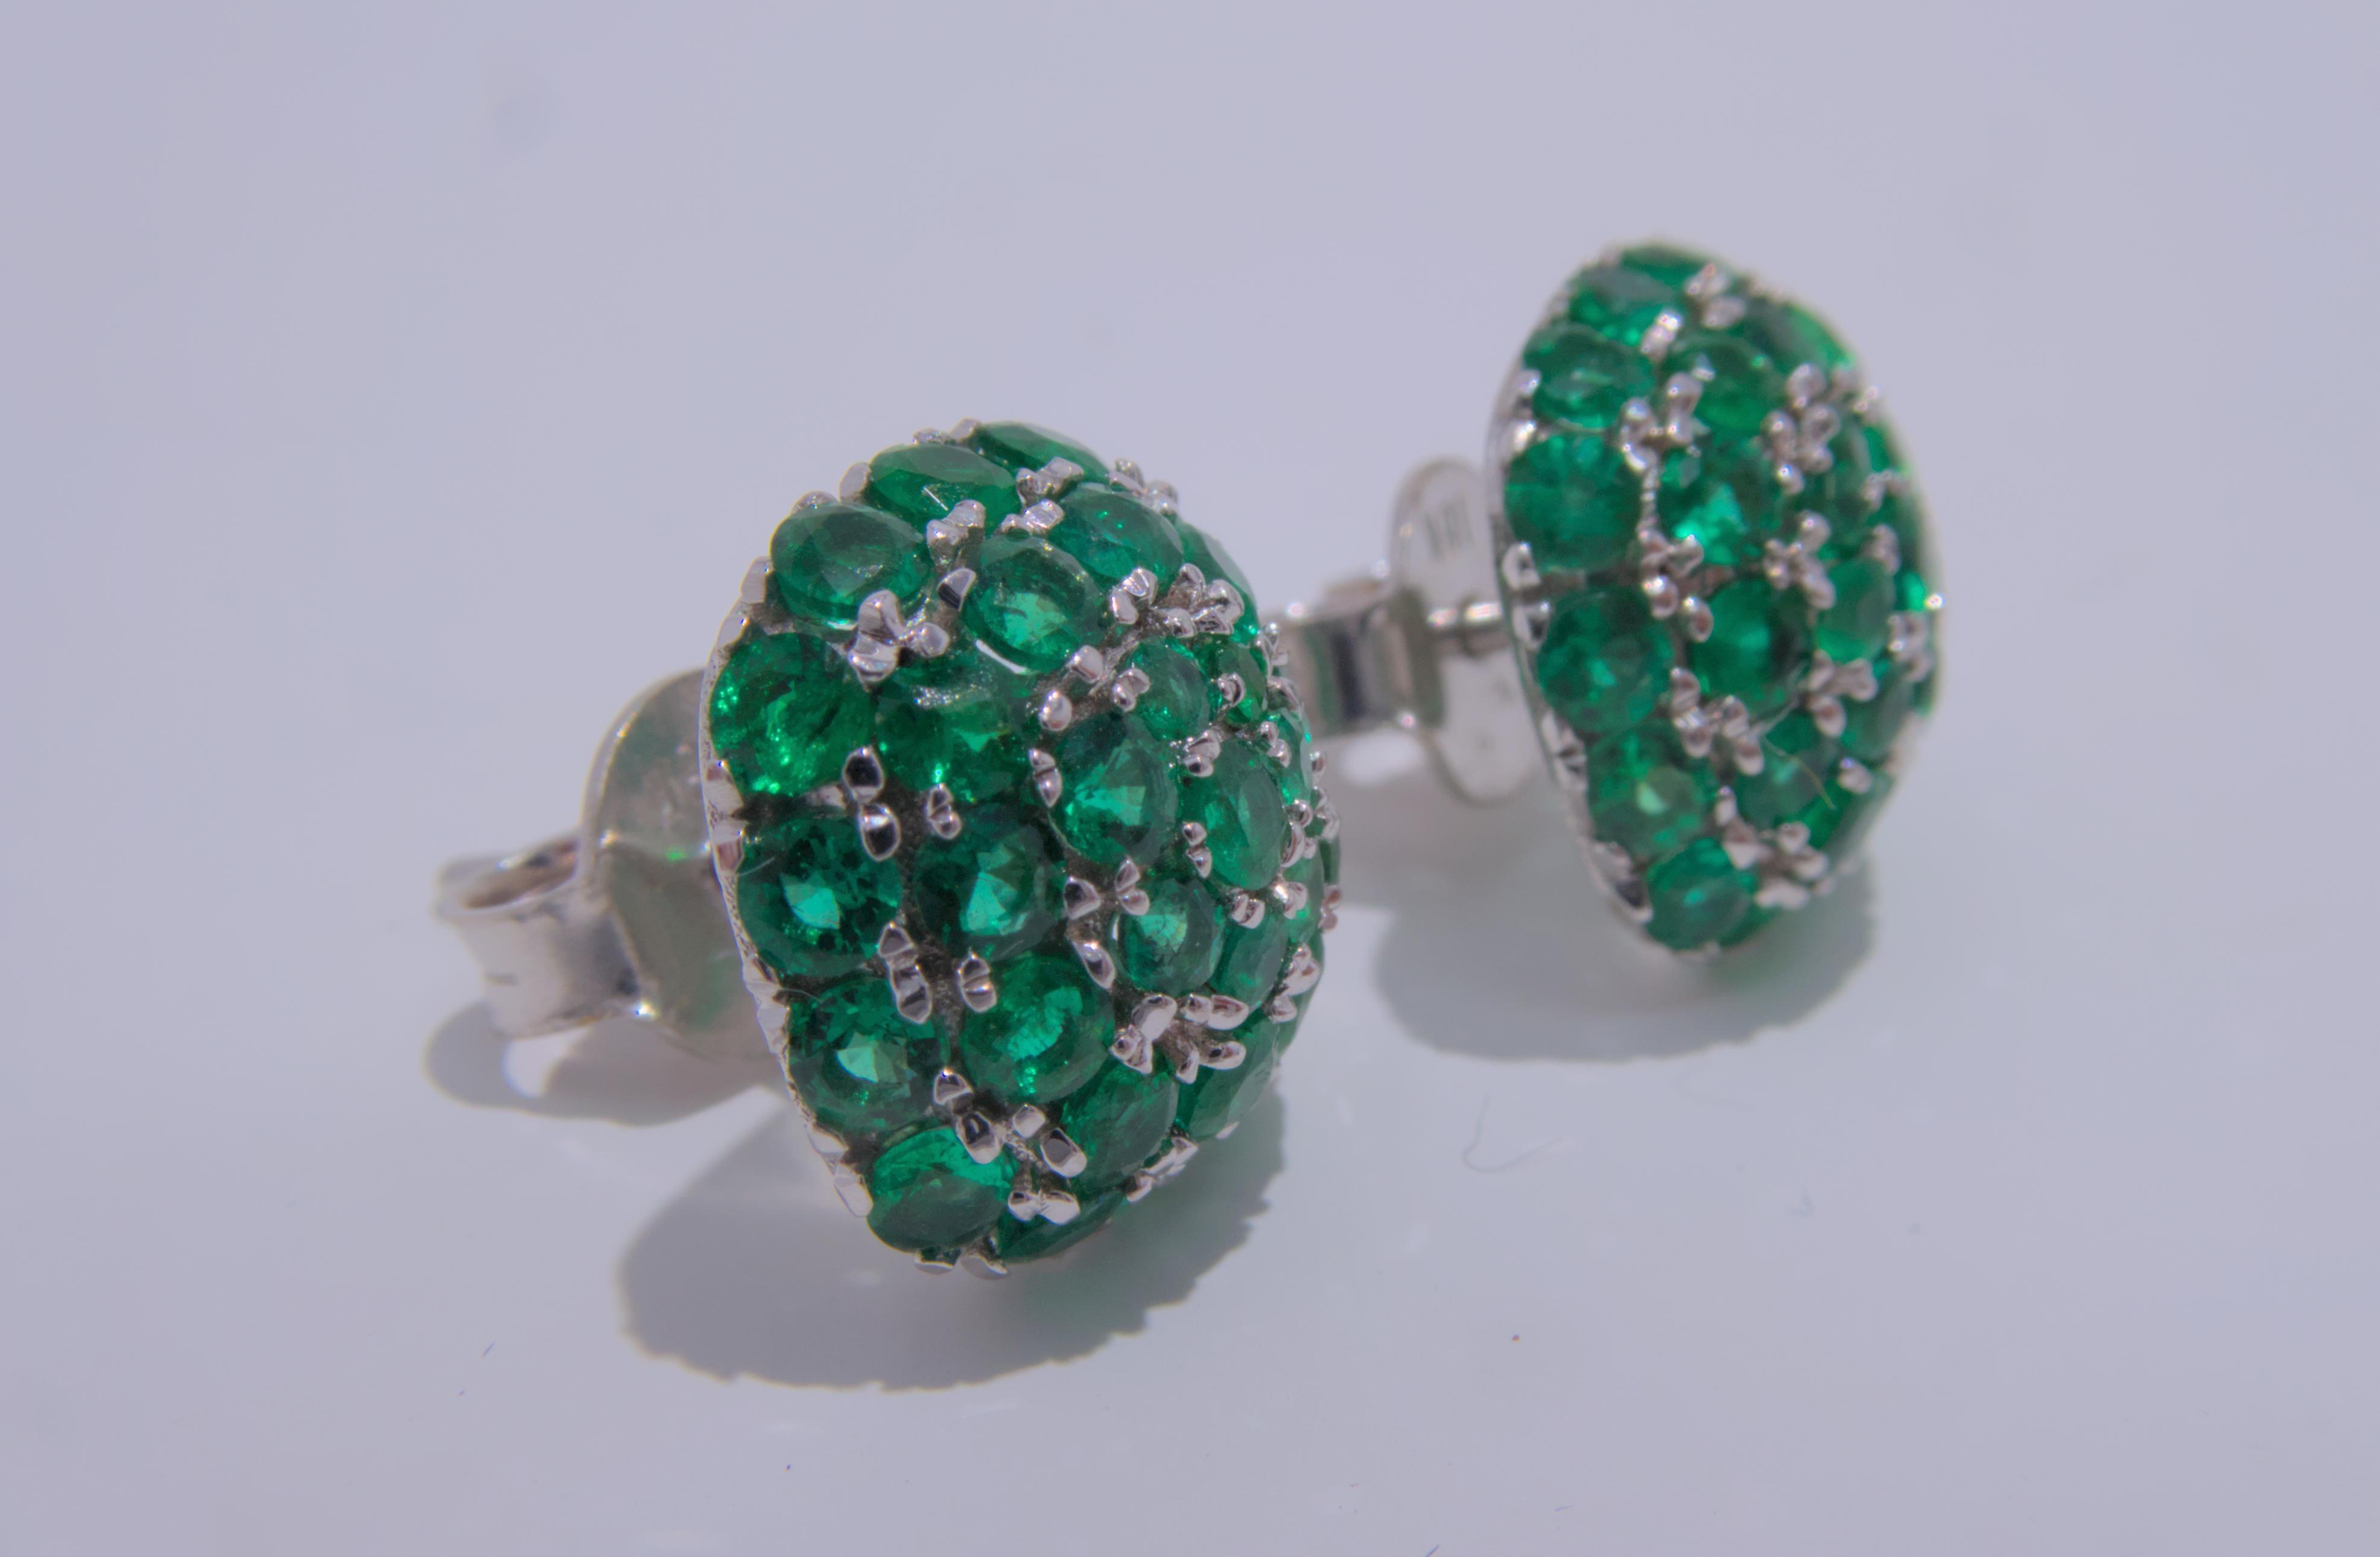 These stunning 18K white gold cluster earrings, designed by Chun Yi, feature a beautiful array of brilliant round emeralds. The total estimated weight of the emeralds is an impressive 1.88 carats, adding a pop of color and a touch of luxury to the